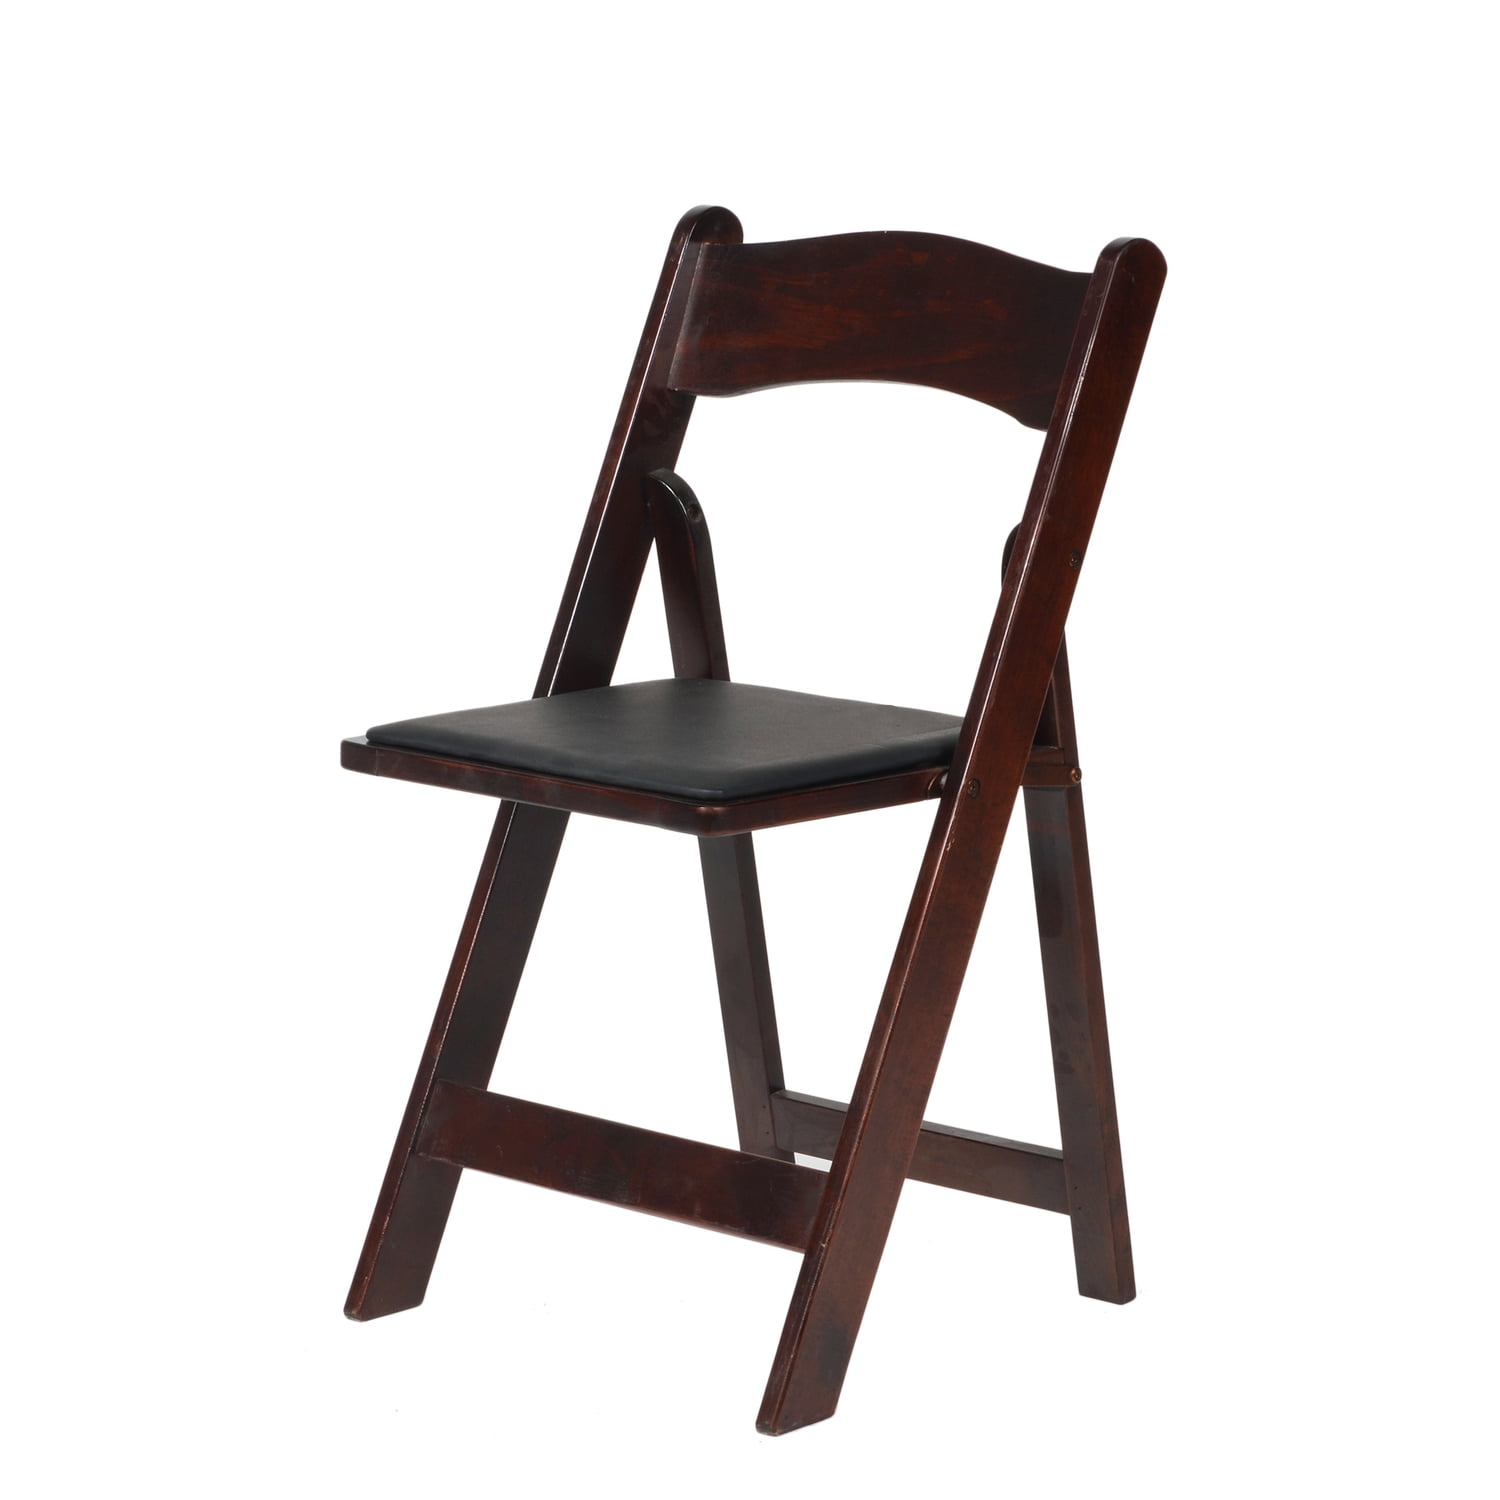 A-101-rm-4 American Classic Red Mahogany Wood Folding Chair - 30.5 In. - Set Of 4